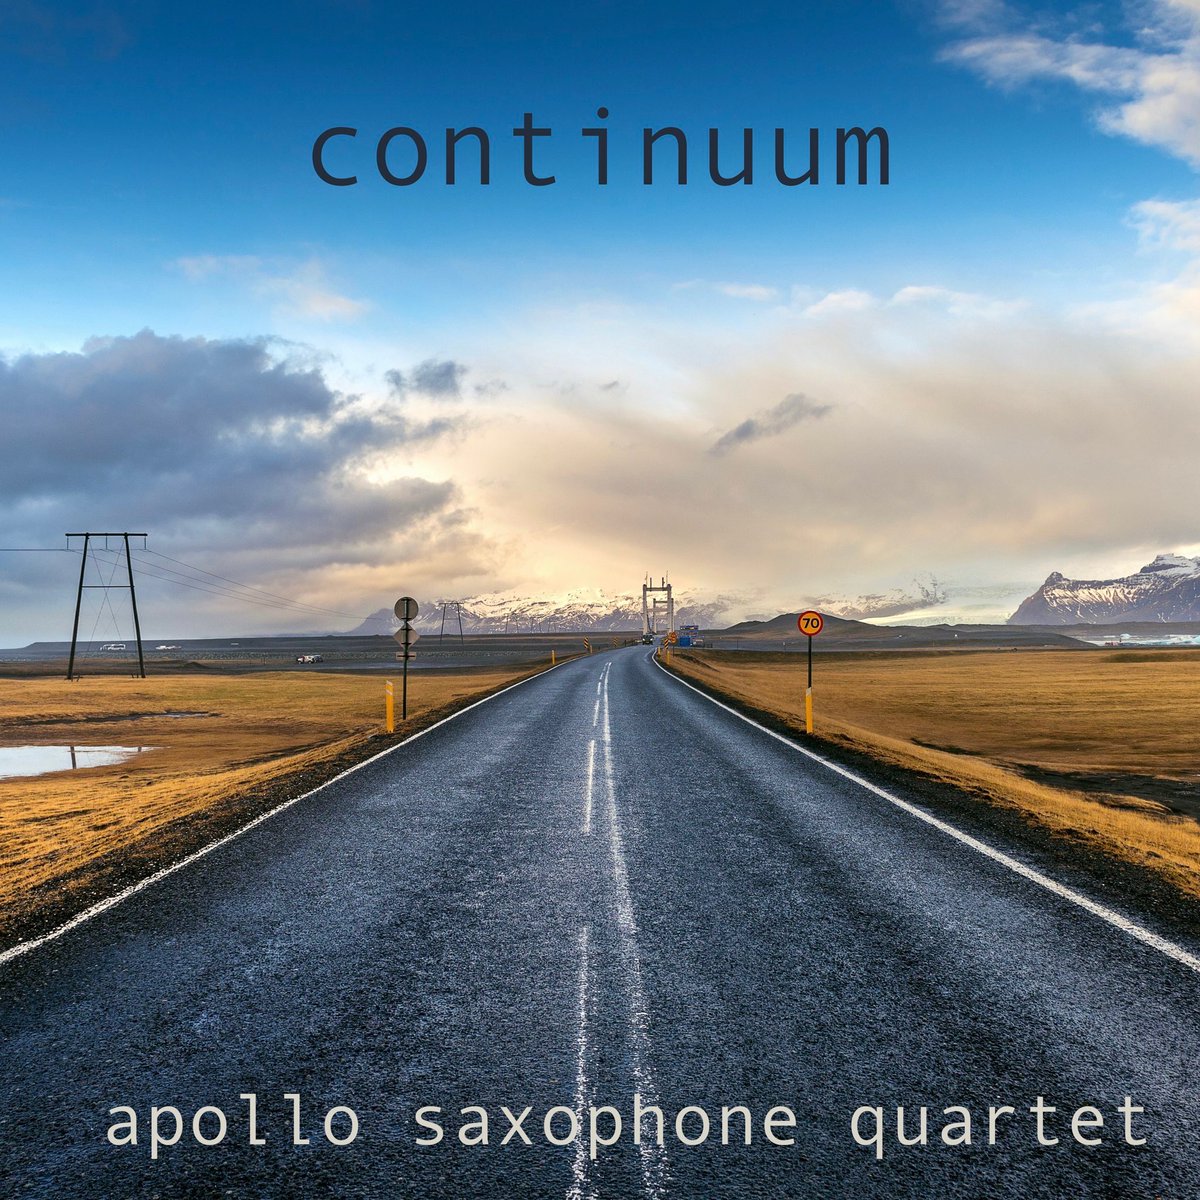 Congratulations to @apollo4tet on the release of new album ‘Continuum’ today!🎷 An album of new saxophone quartets by @DaniHoward6 @ClaireECope @j_watson_music #BillConnor #AdamCaird, as well as my ‘In the Fragrant Air,’ which you can hear on @Bandcamp✨ apollosaxophonequartet.bandcamp.com/album/continuum